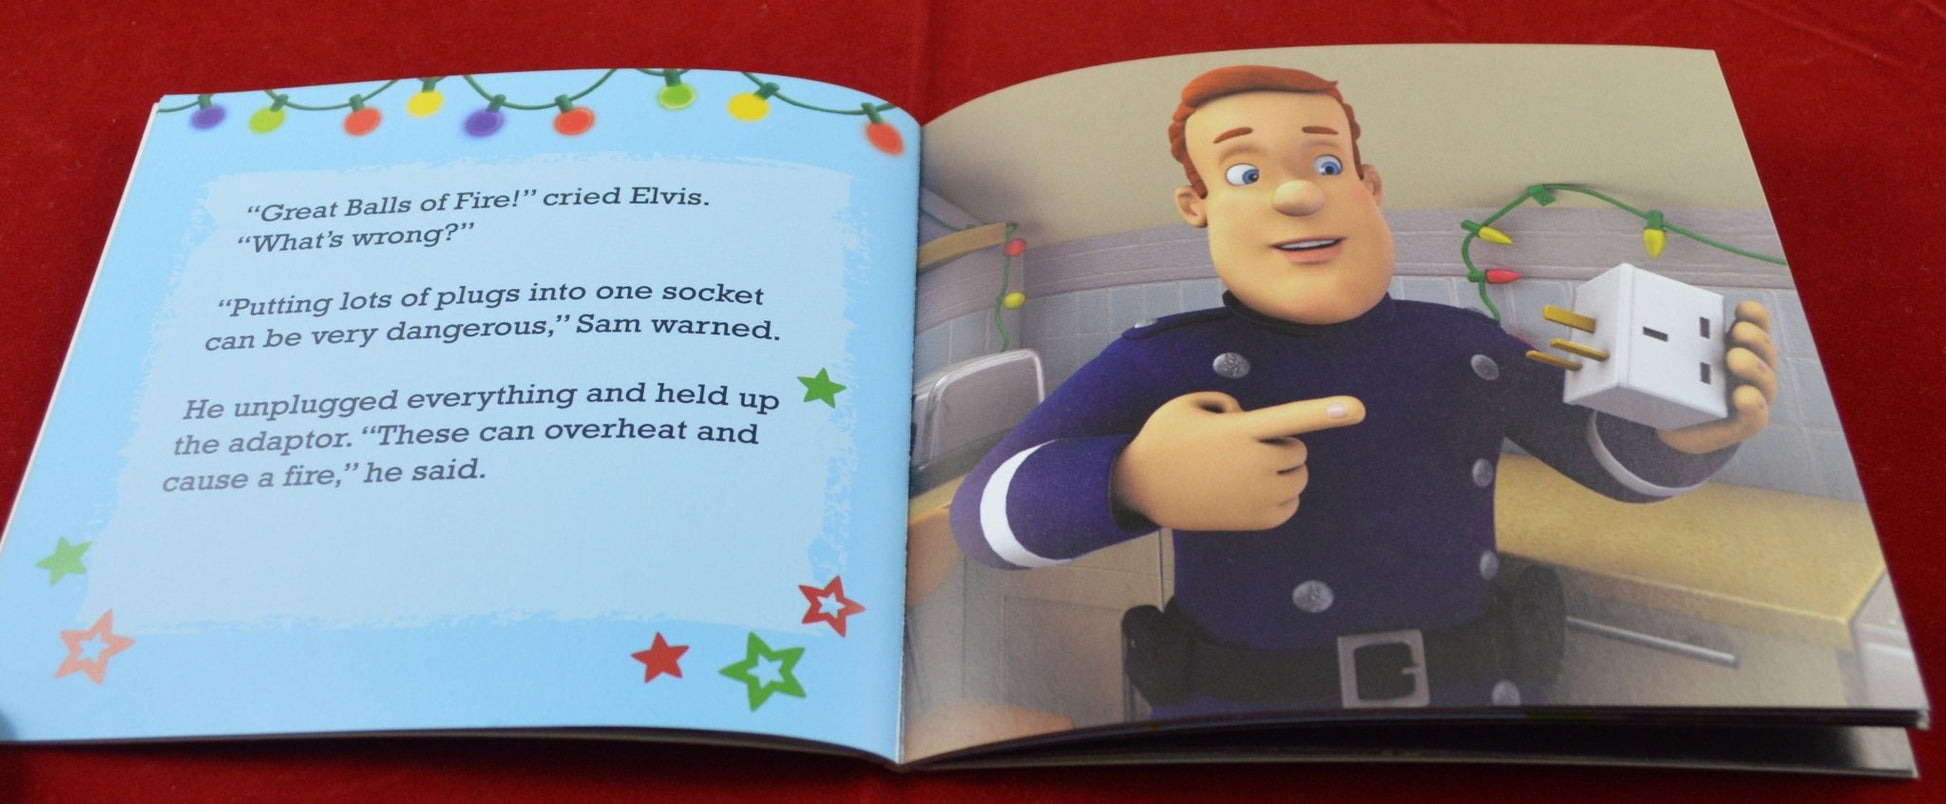 CHILDRENS BOOKS SIX FIREMAN SAM BOOKS(PREVIOUSLY OWNED)GOOD CONDITION. - TMD167207